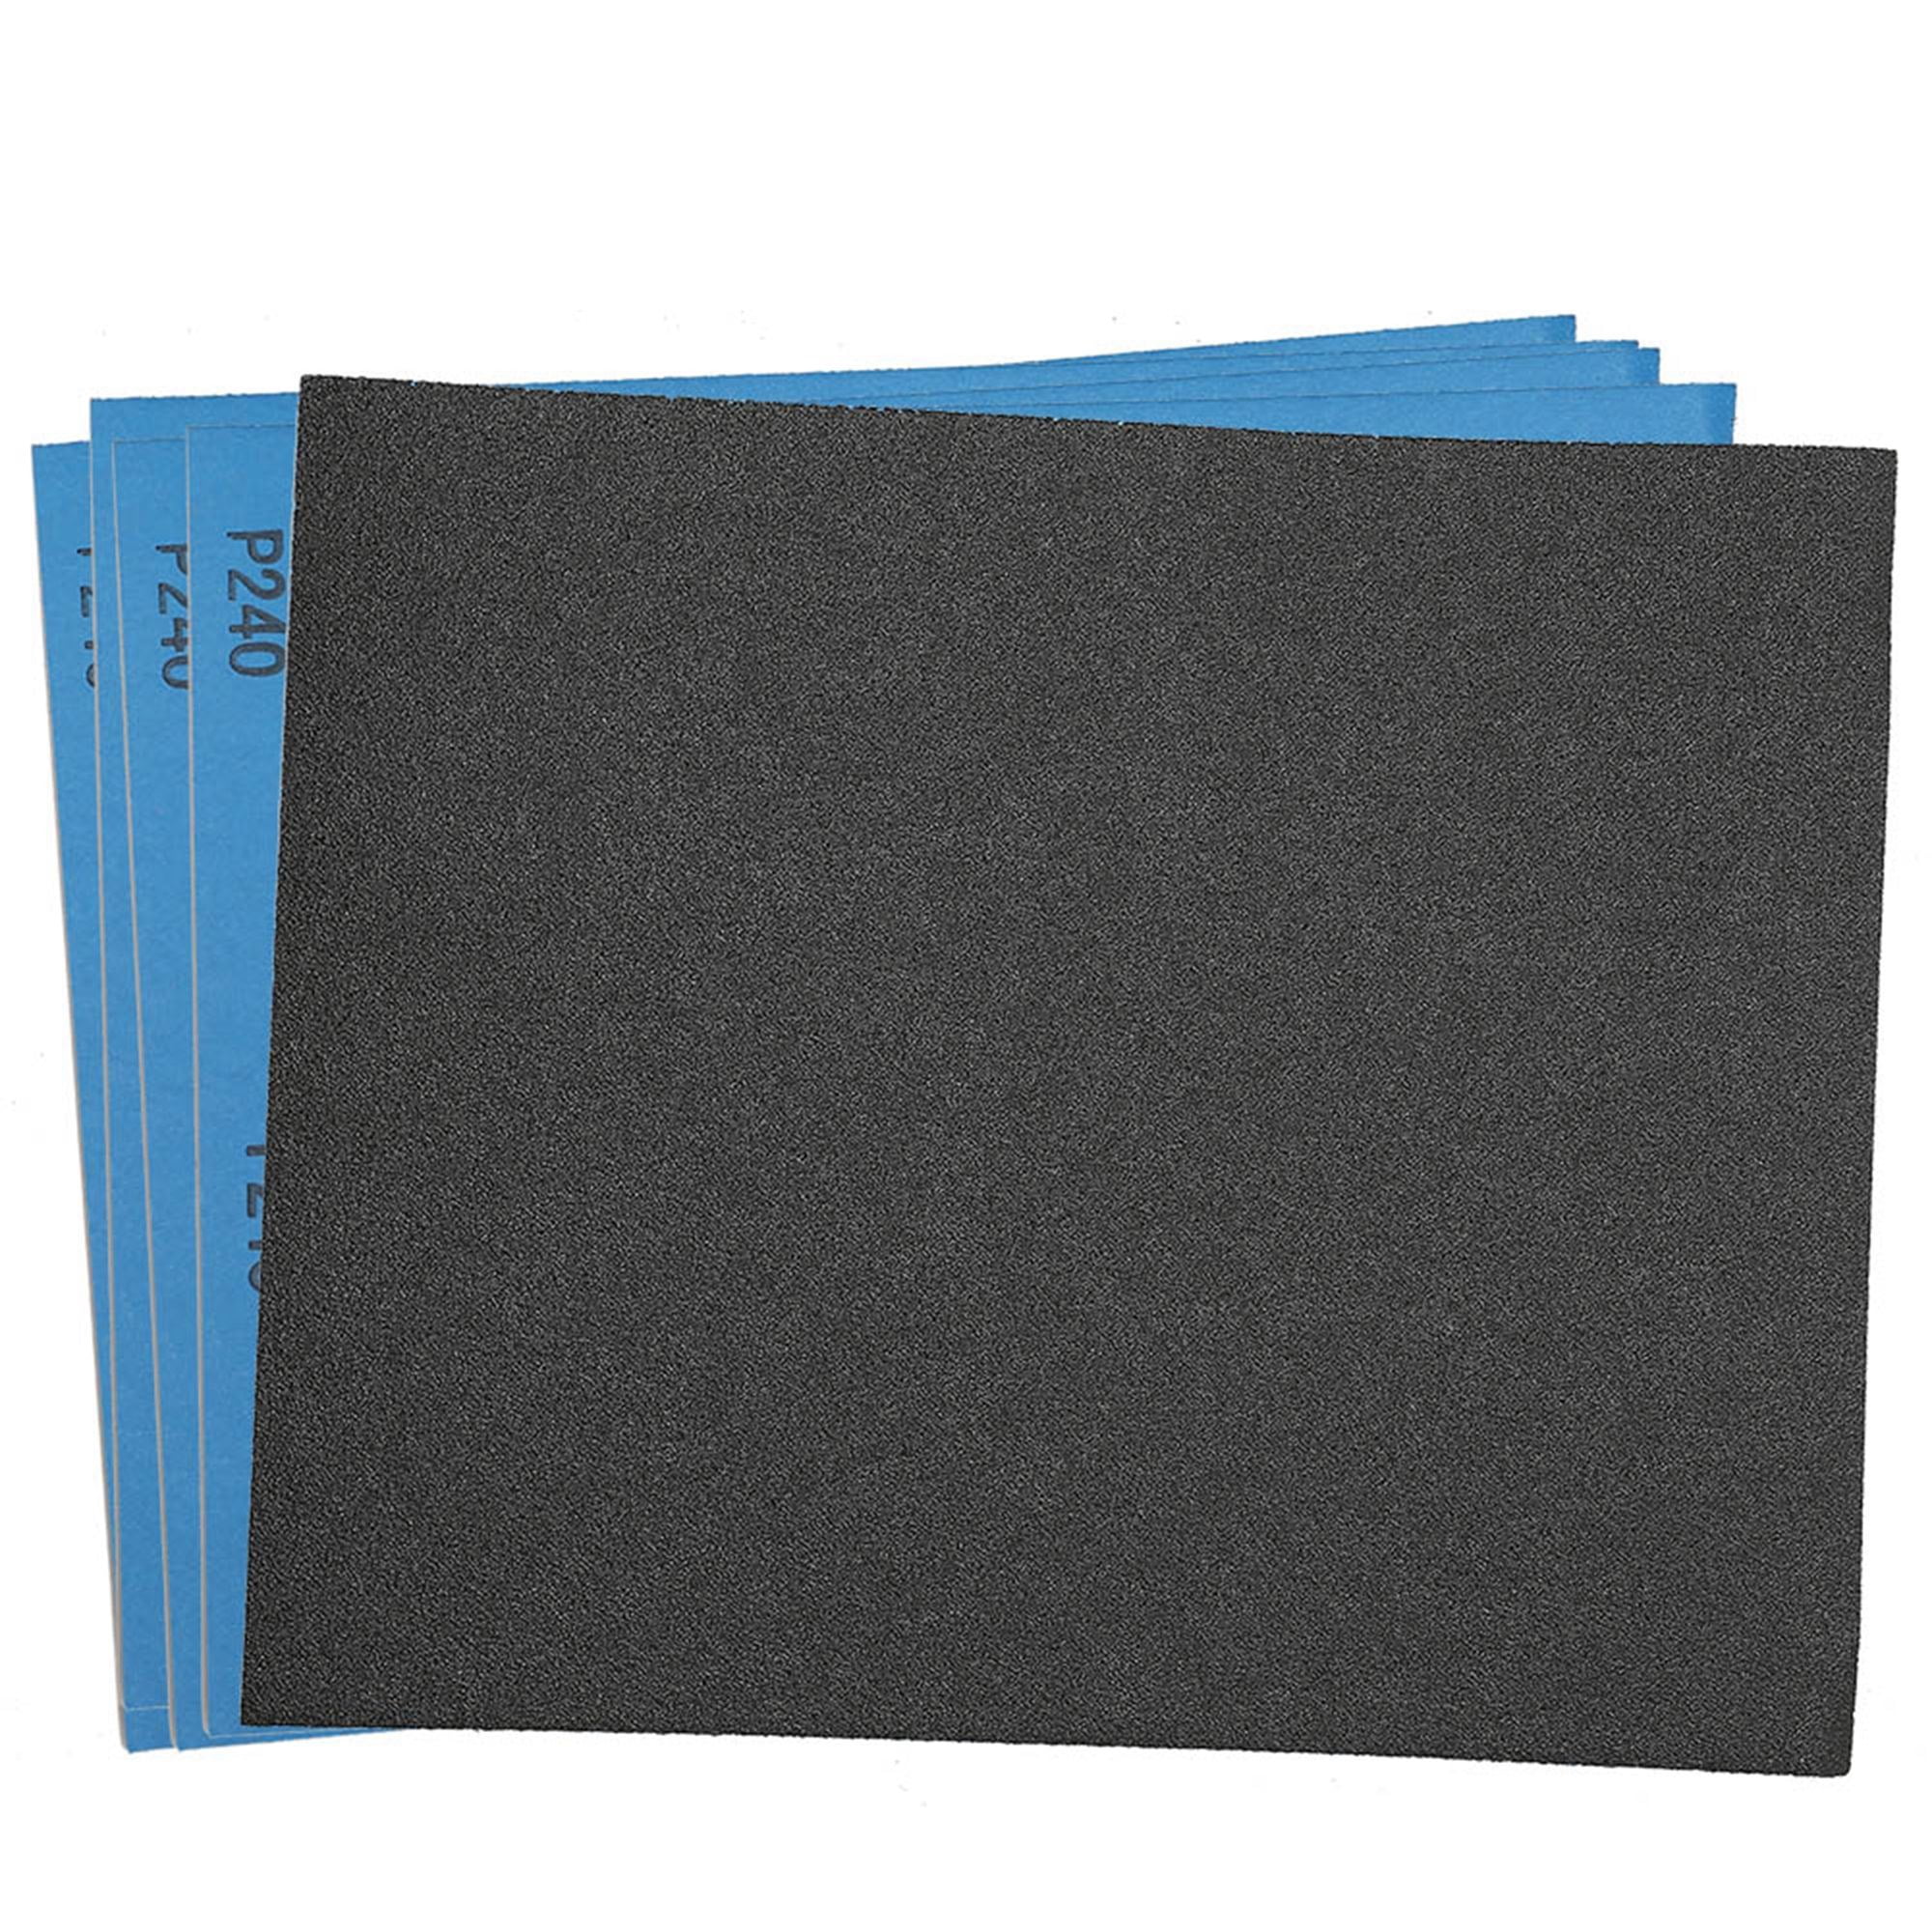 3000 Grit 5 sheets Sandpaper Waterproof Paper 9"x11" Wet/Dry Silicon Carbide 